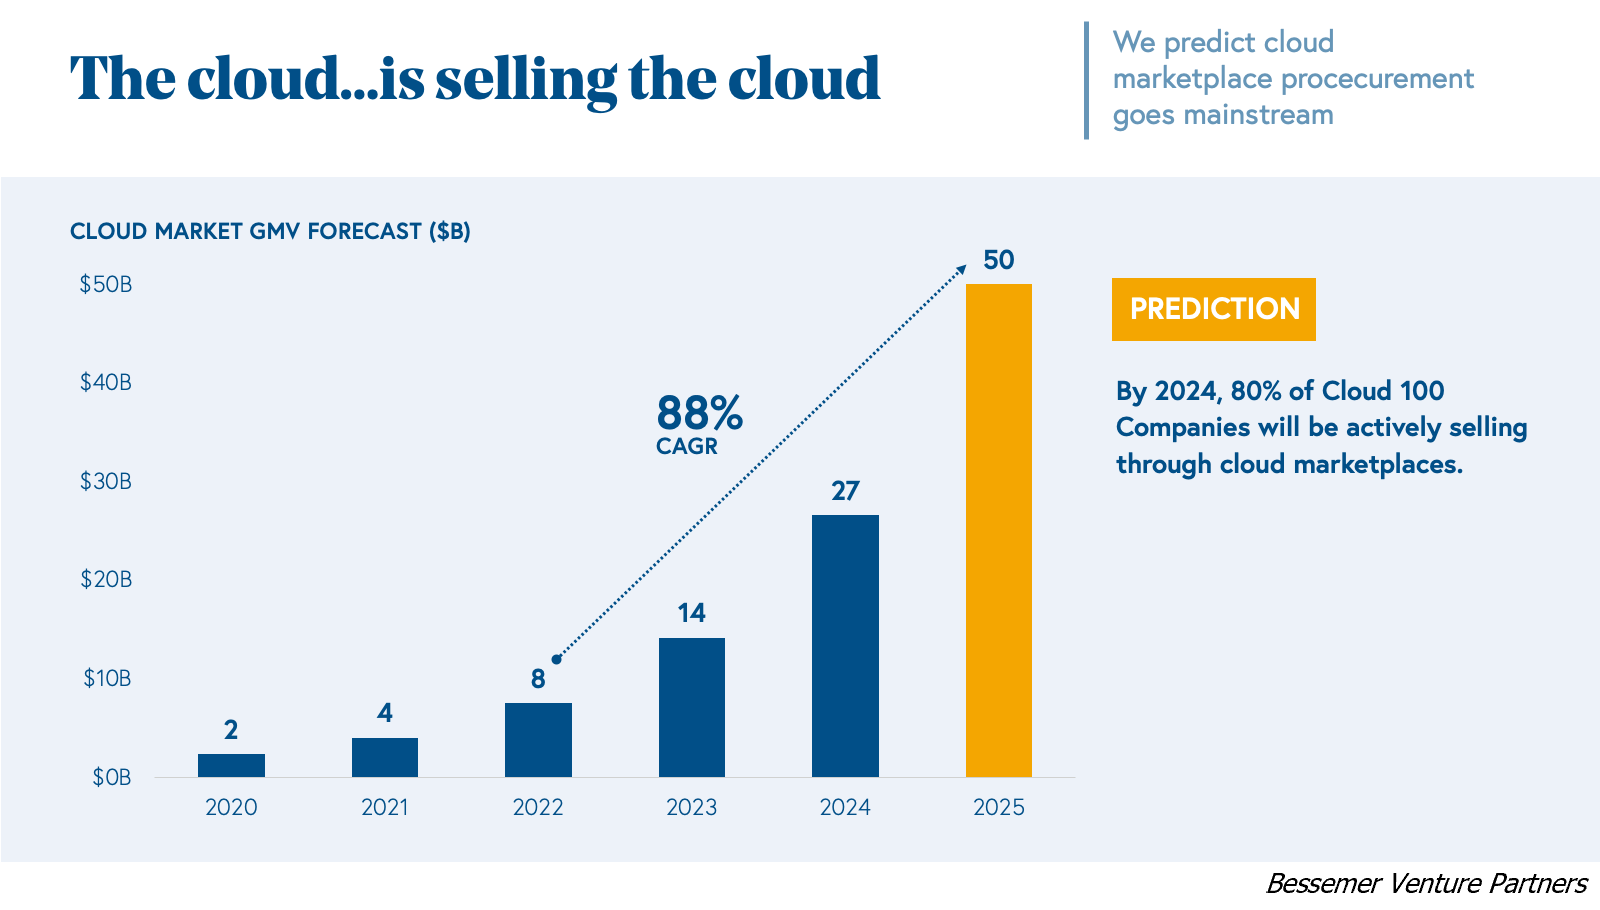 The Cloud is selling the cloud, powerful sales channels